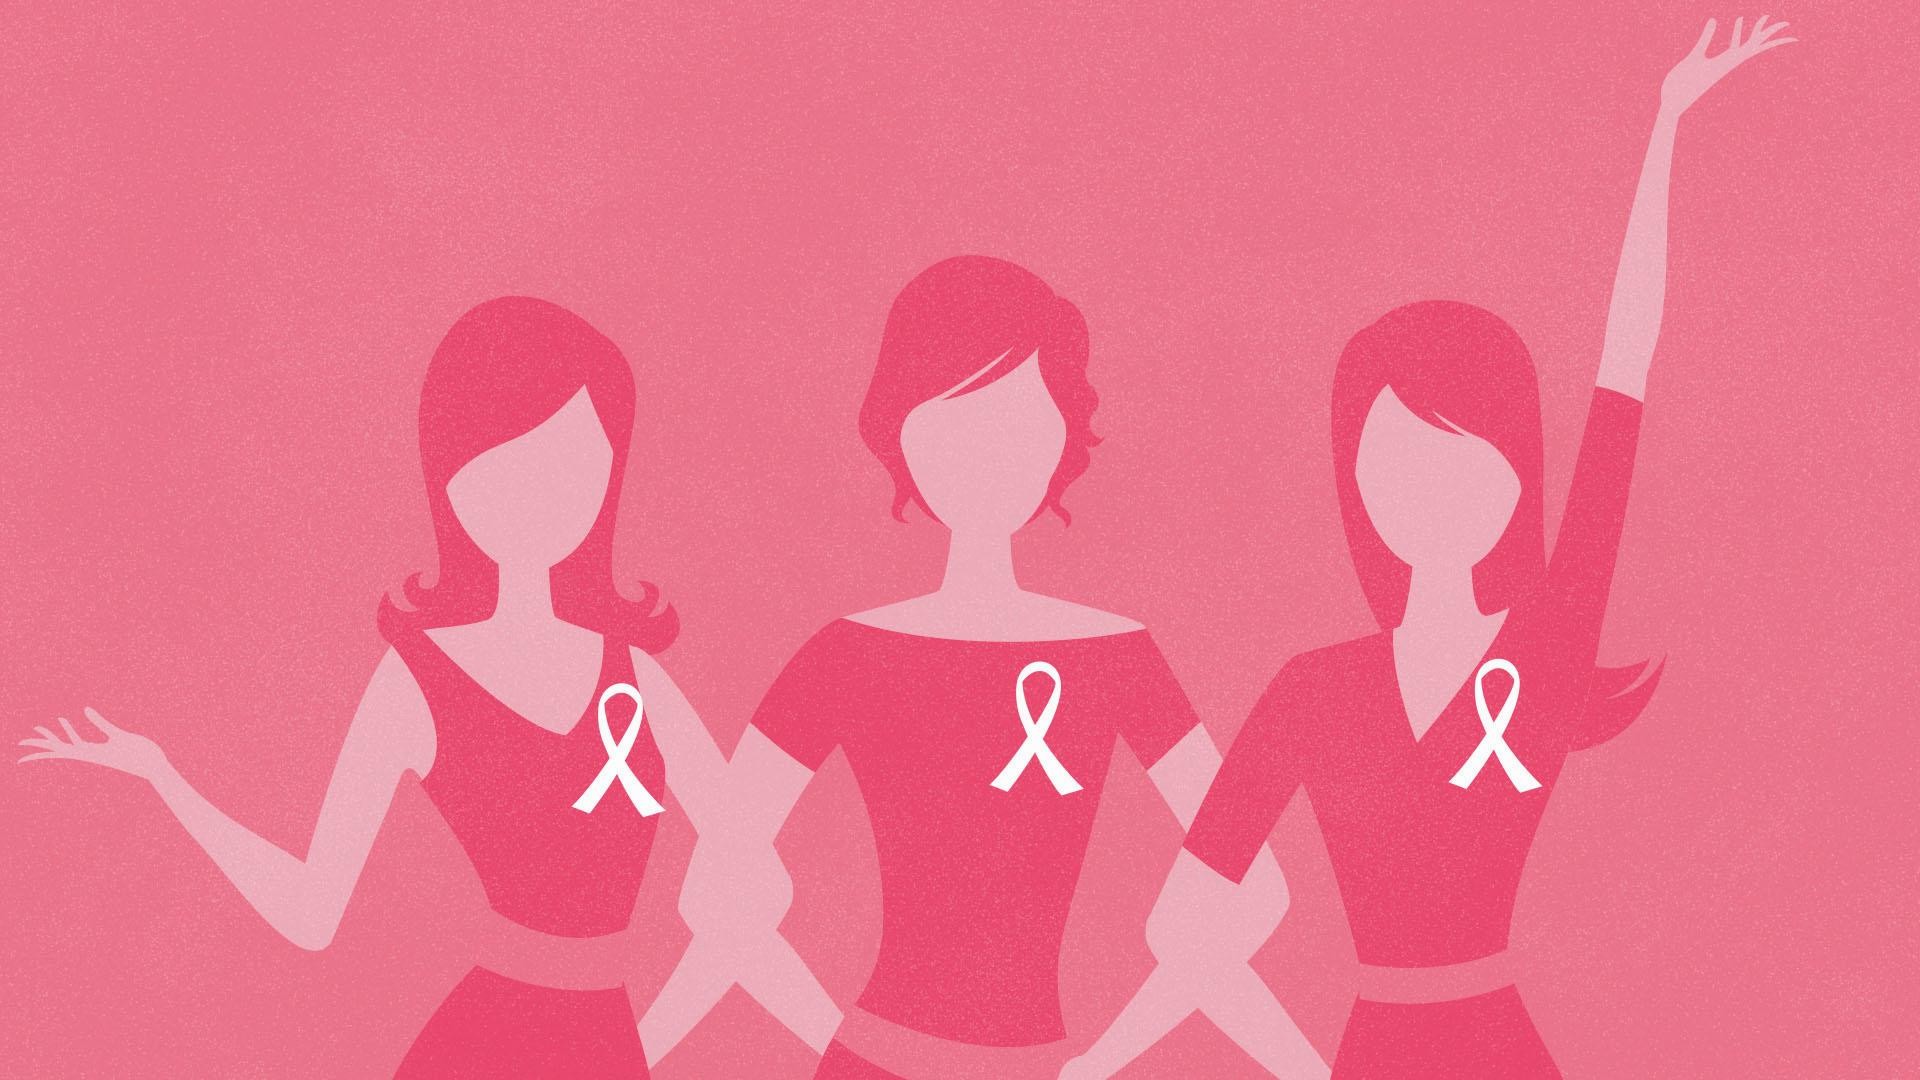 Data-src - Together We Fight Breast Cancer - HD Wallpaper 